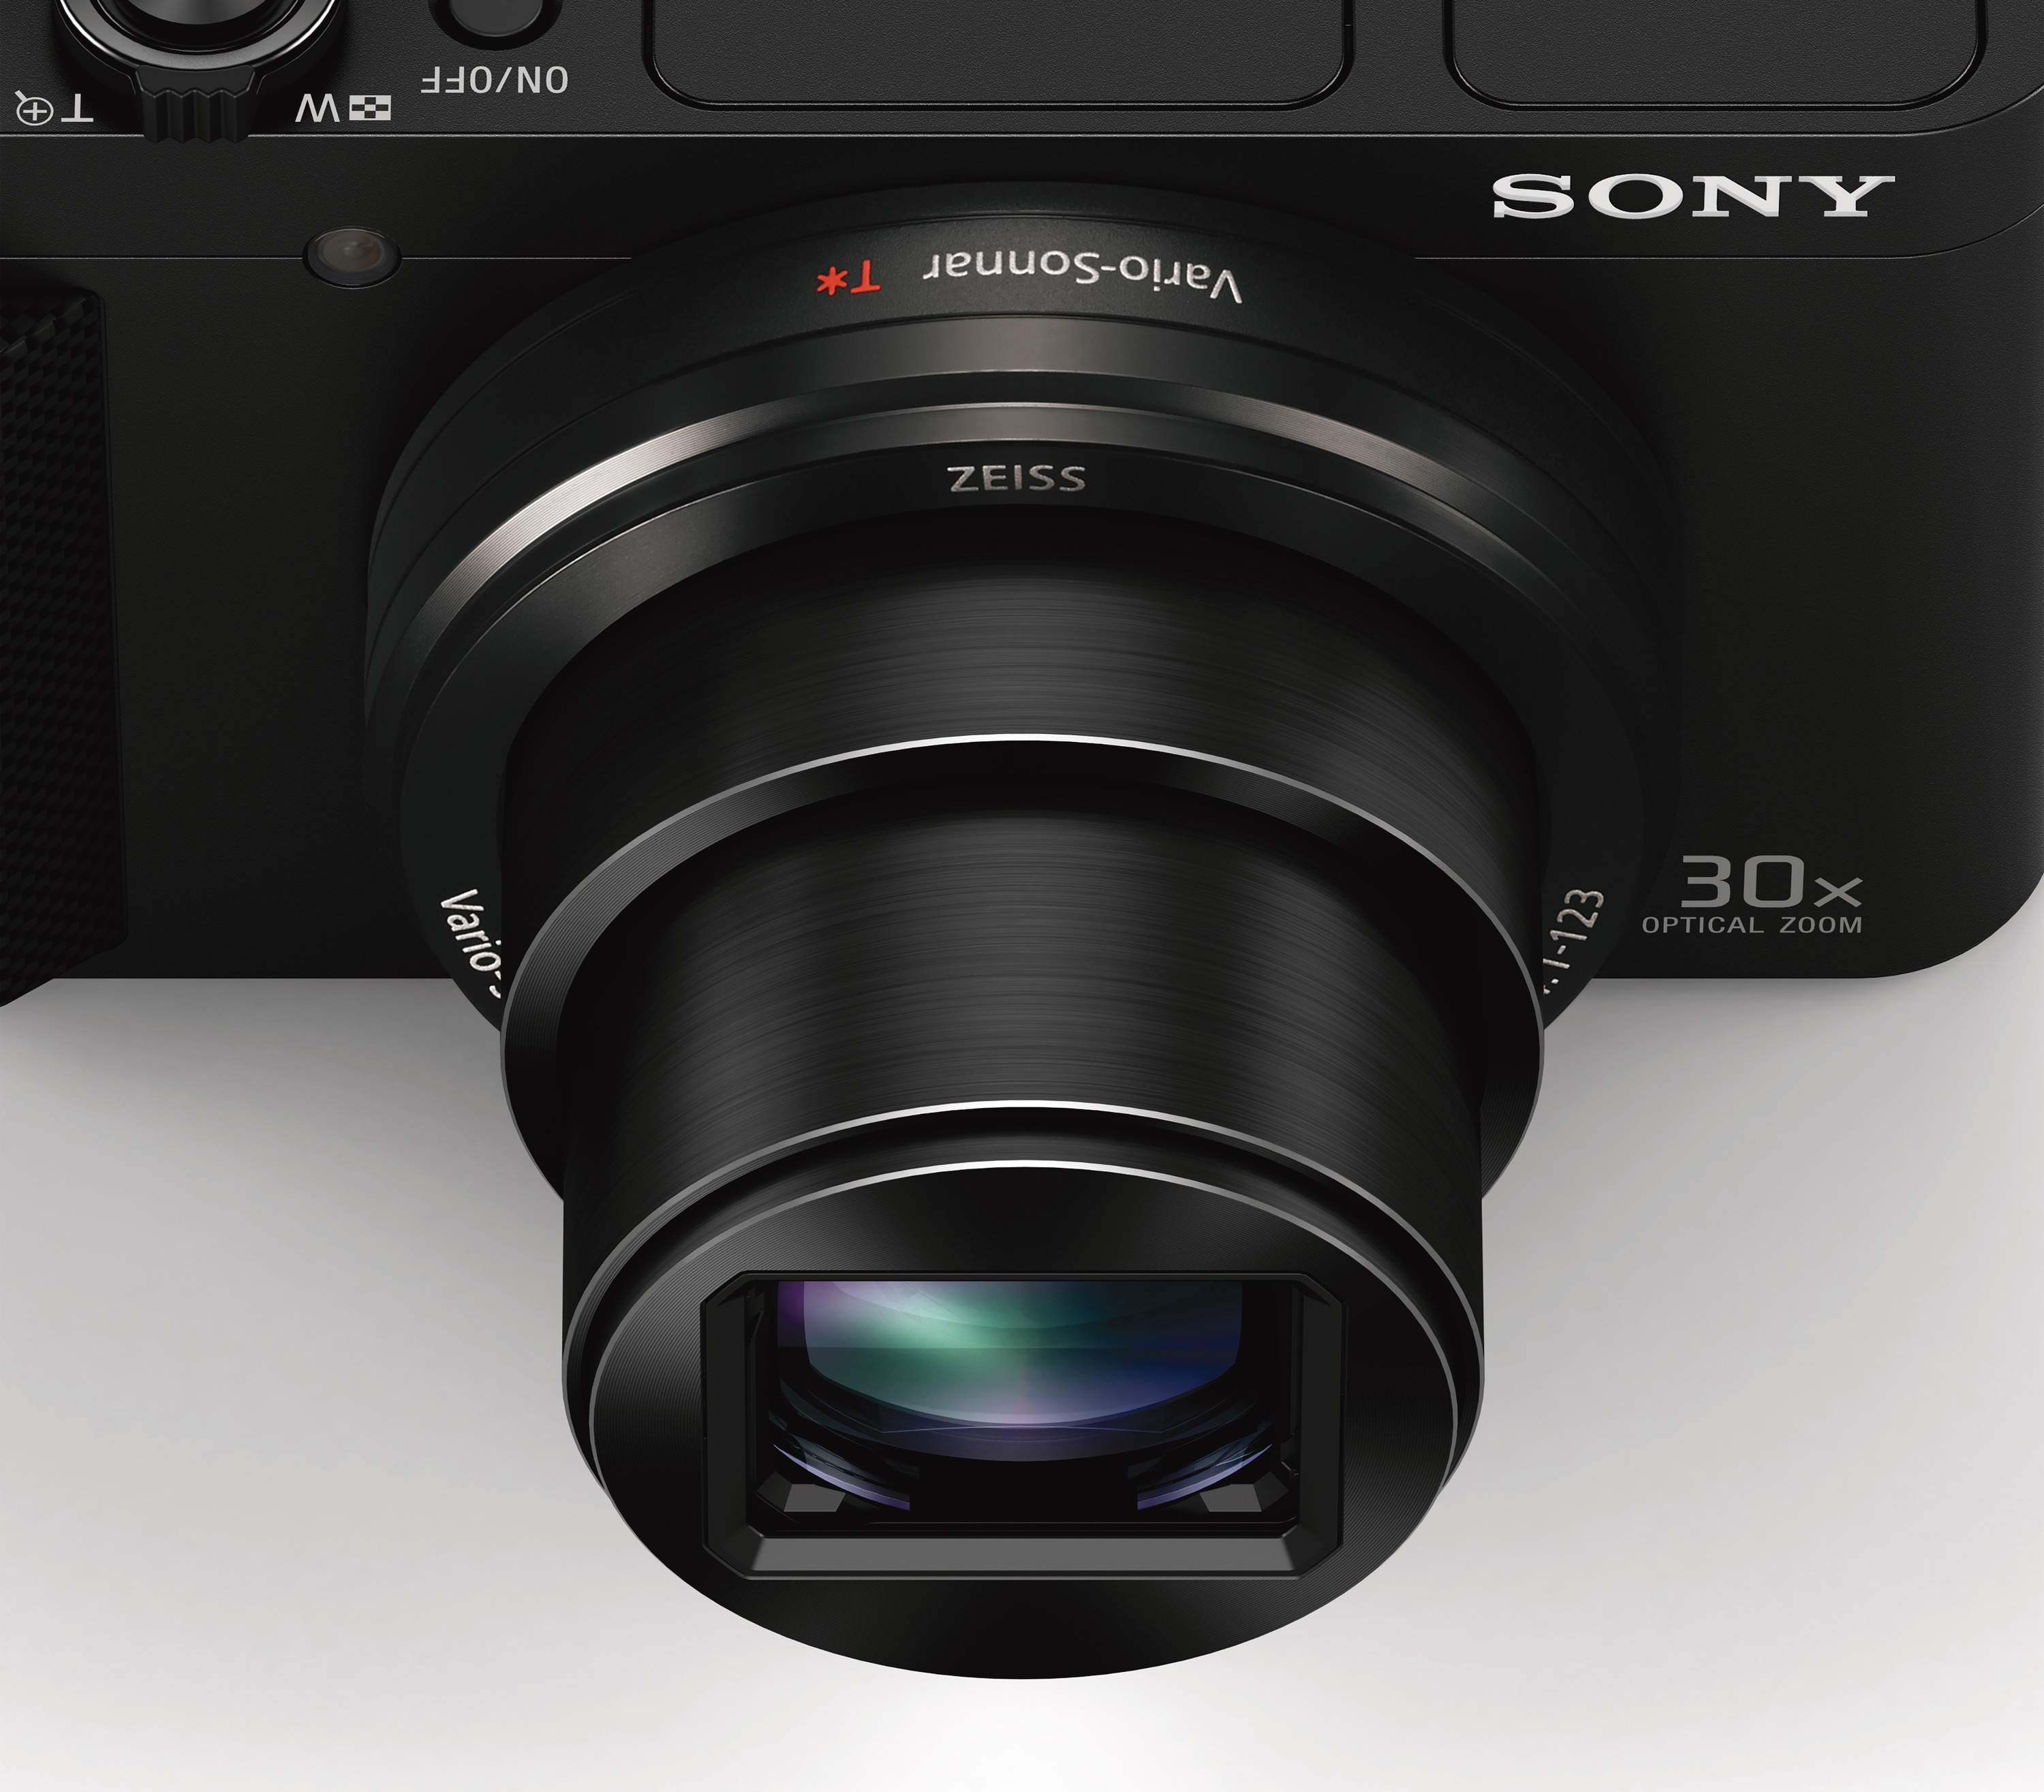 DSC-HX80/B High-zoom Point and Shoot Camera - image 4 of 9